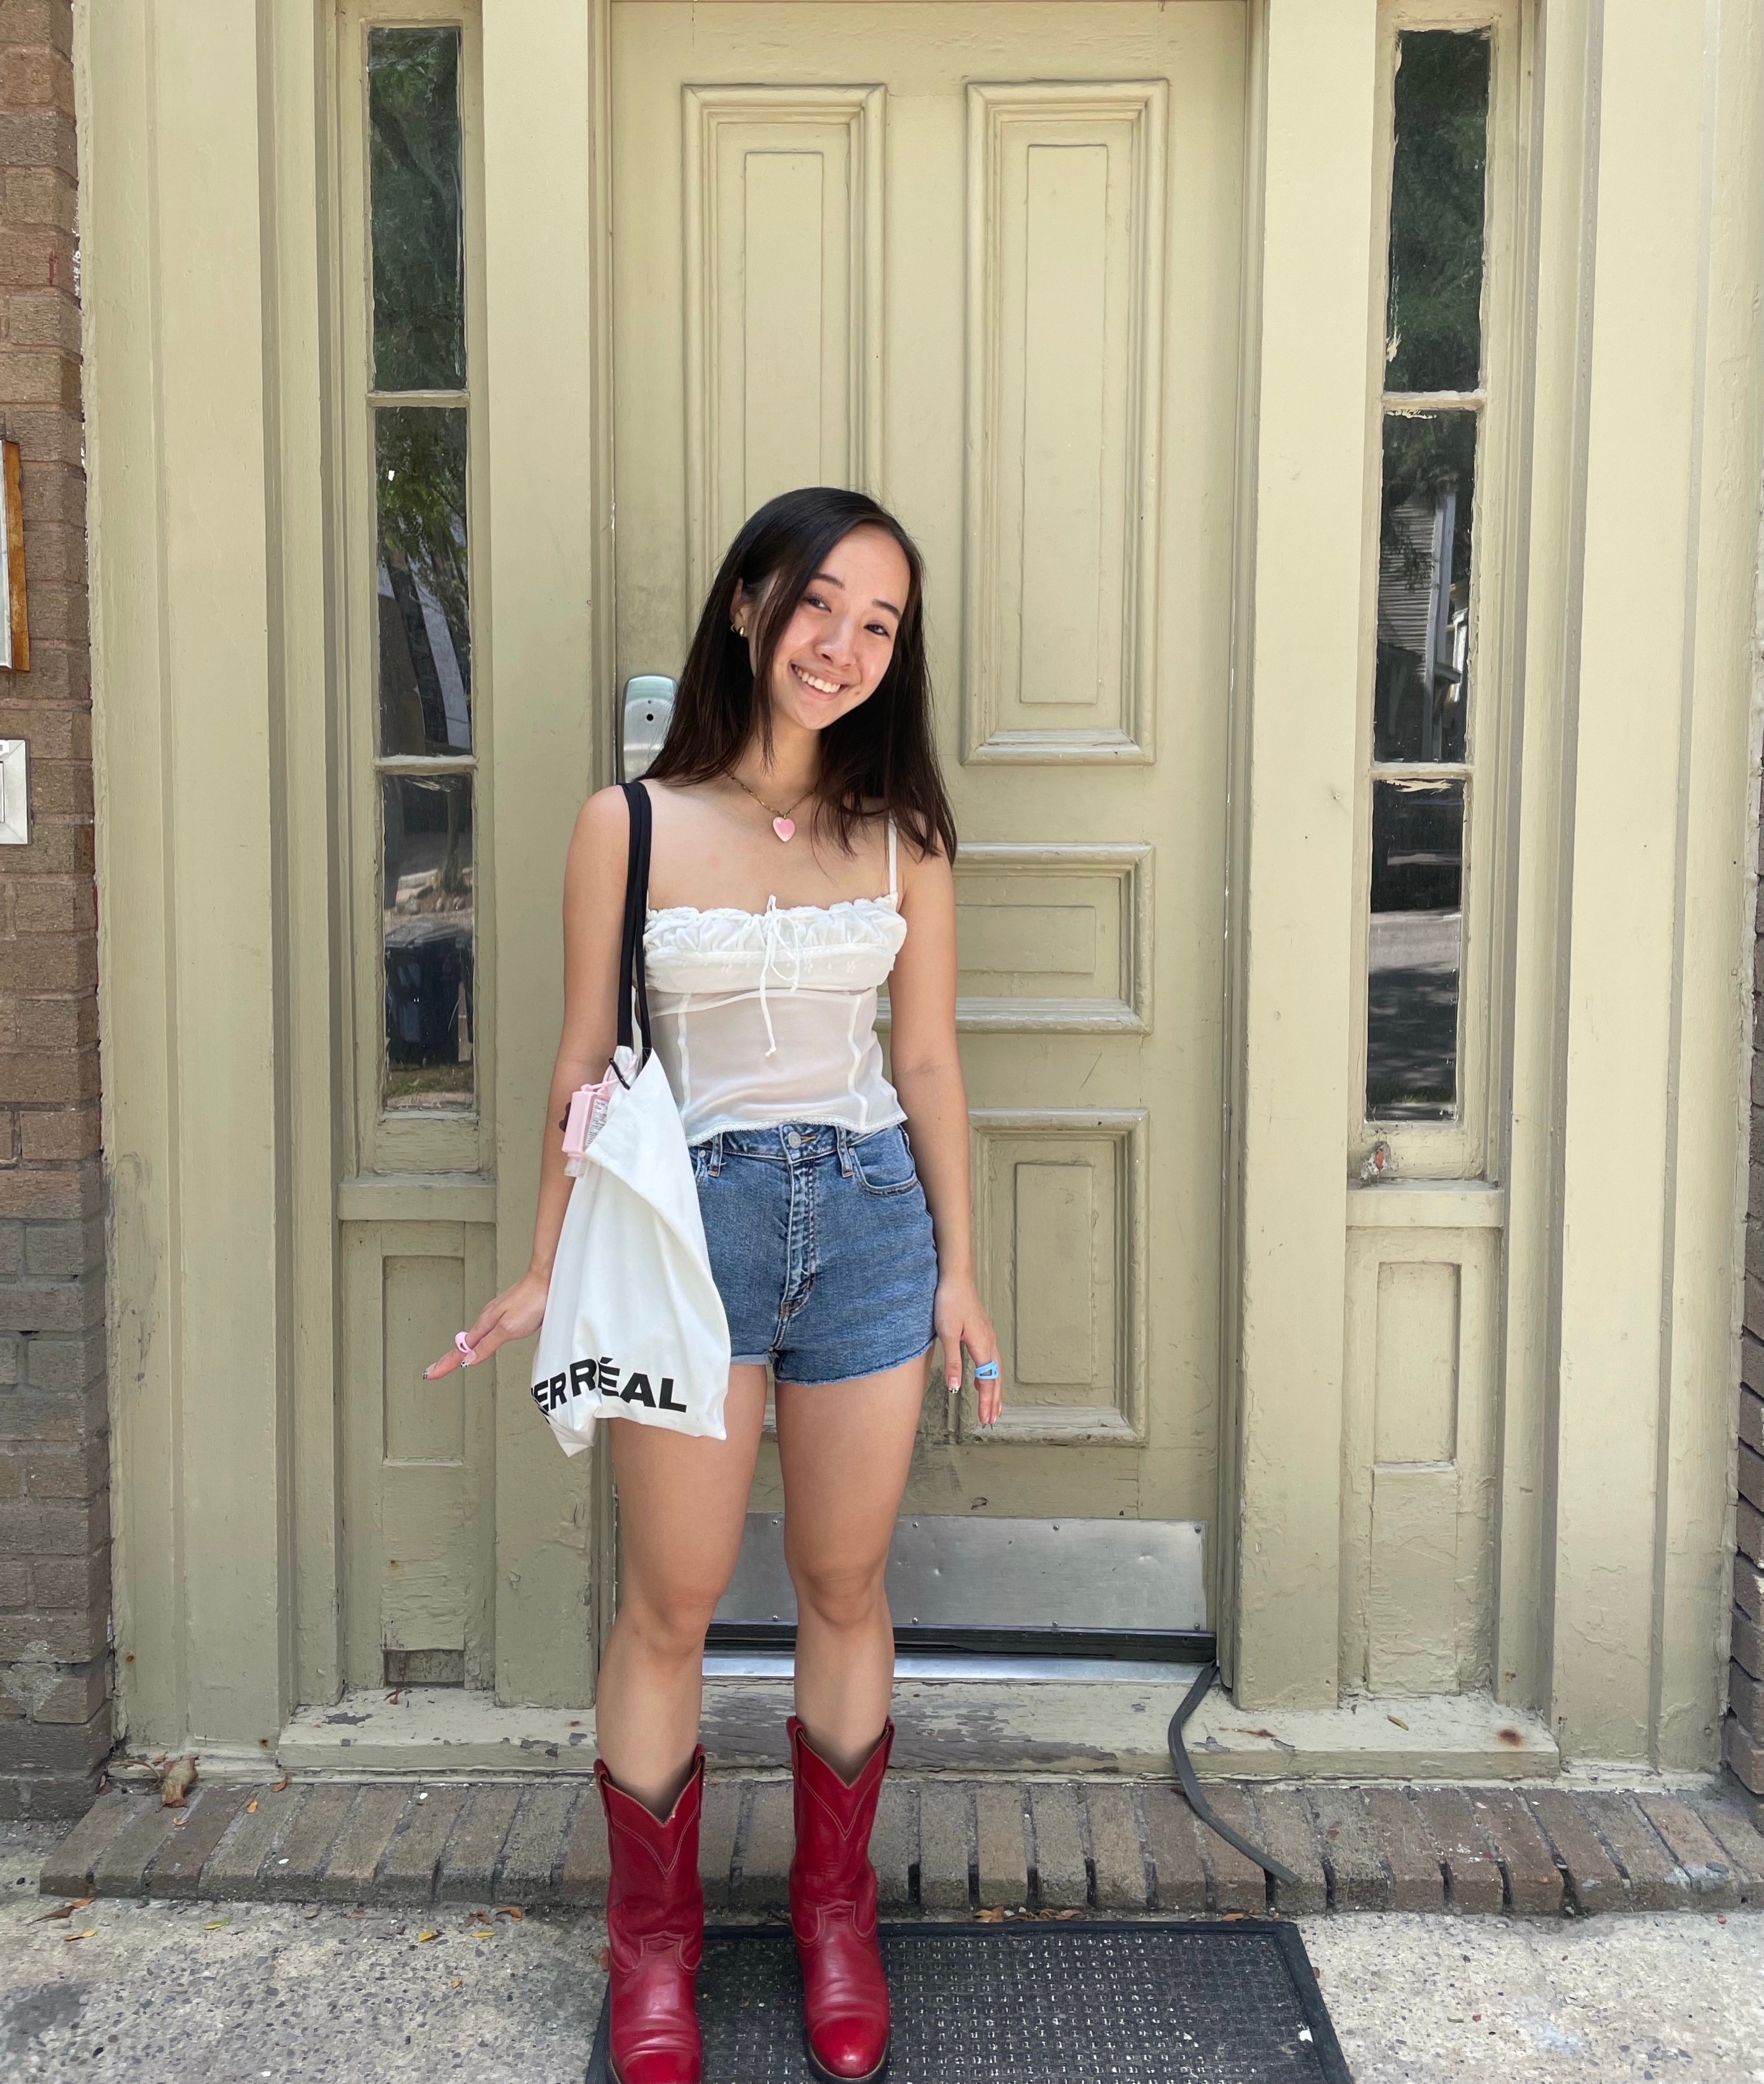 Kathy smiling standing in front of a door, in a white top, jean shorts, and red cowboy boots